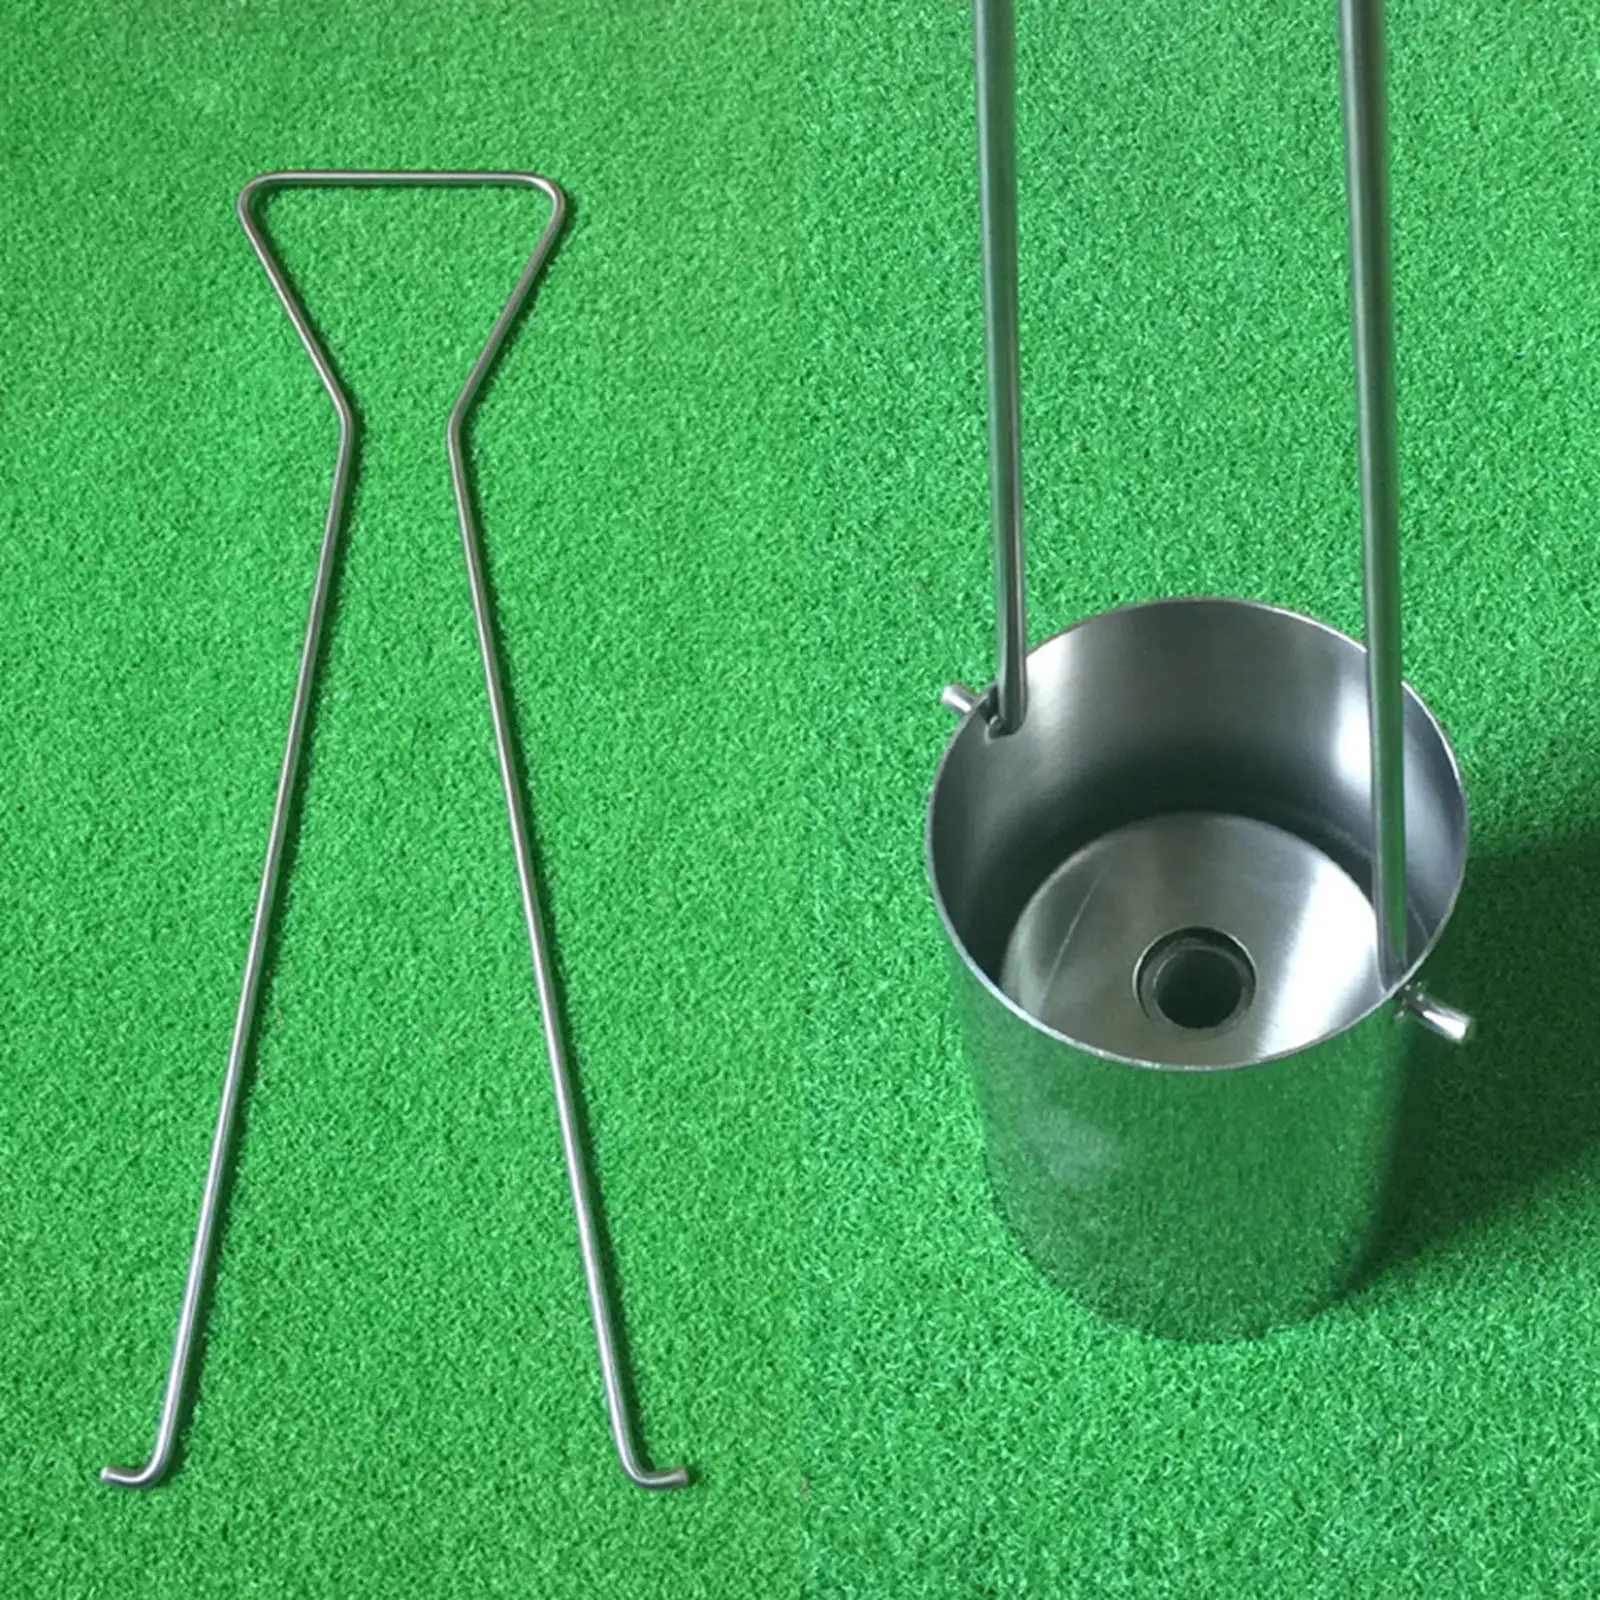 Putting Green Cup Grabber, Golf Hole Cup Picker Easy to Use Lifter Metal Golf Accessories Lightweight Green Cup Taker